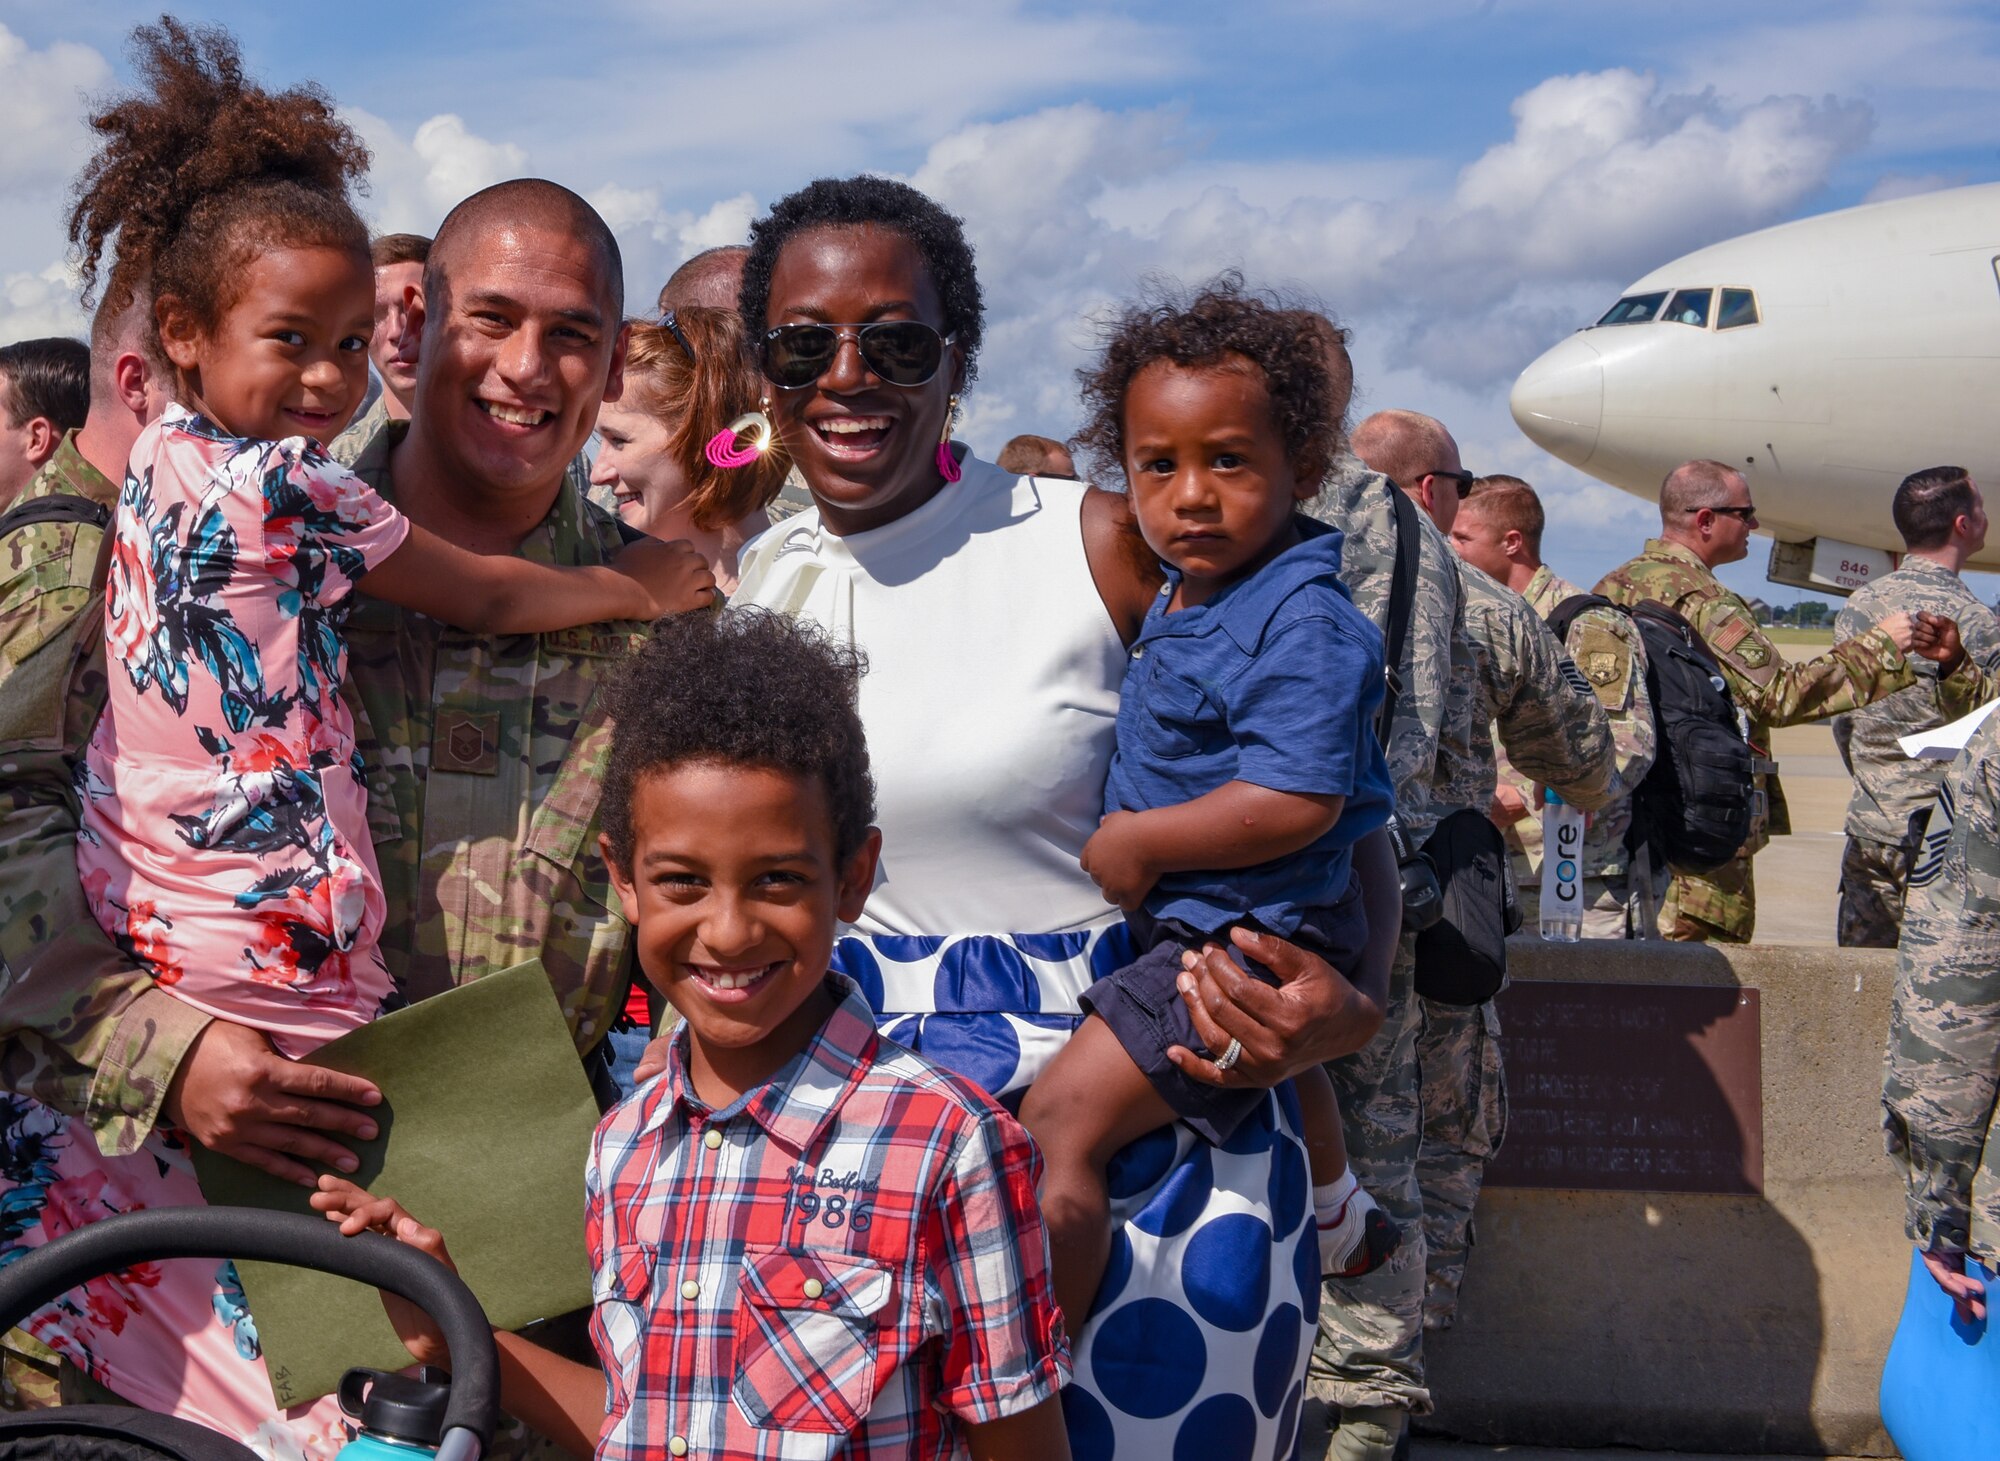 U.S. Air Force Master Sgt. Victor Chavez, 1st Maintenance Squadron, poses for a photo with his family after returning to  Joint Base Langley-Eustis, Virginia, Oct. 9, 2018. During a 6-month deployment, the U.S. Air Force Airmen and F-22 Raptors delivered air superiority during combat operations, supporting Operation Inherent Resolve and the fight against enemy forces in Iraq and Syria. (U.S. Air Force Photo by Staff Sgt. Carlin Leslie)